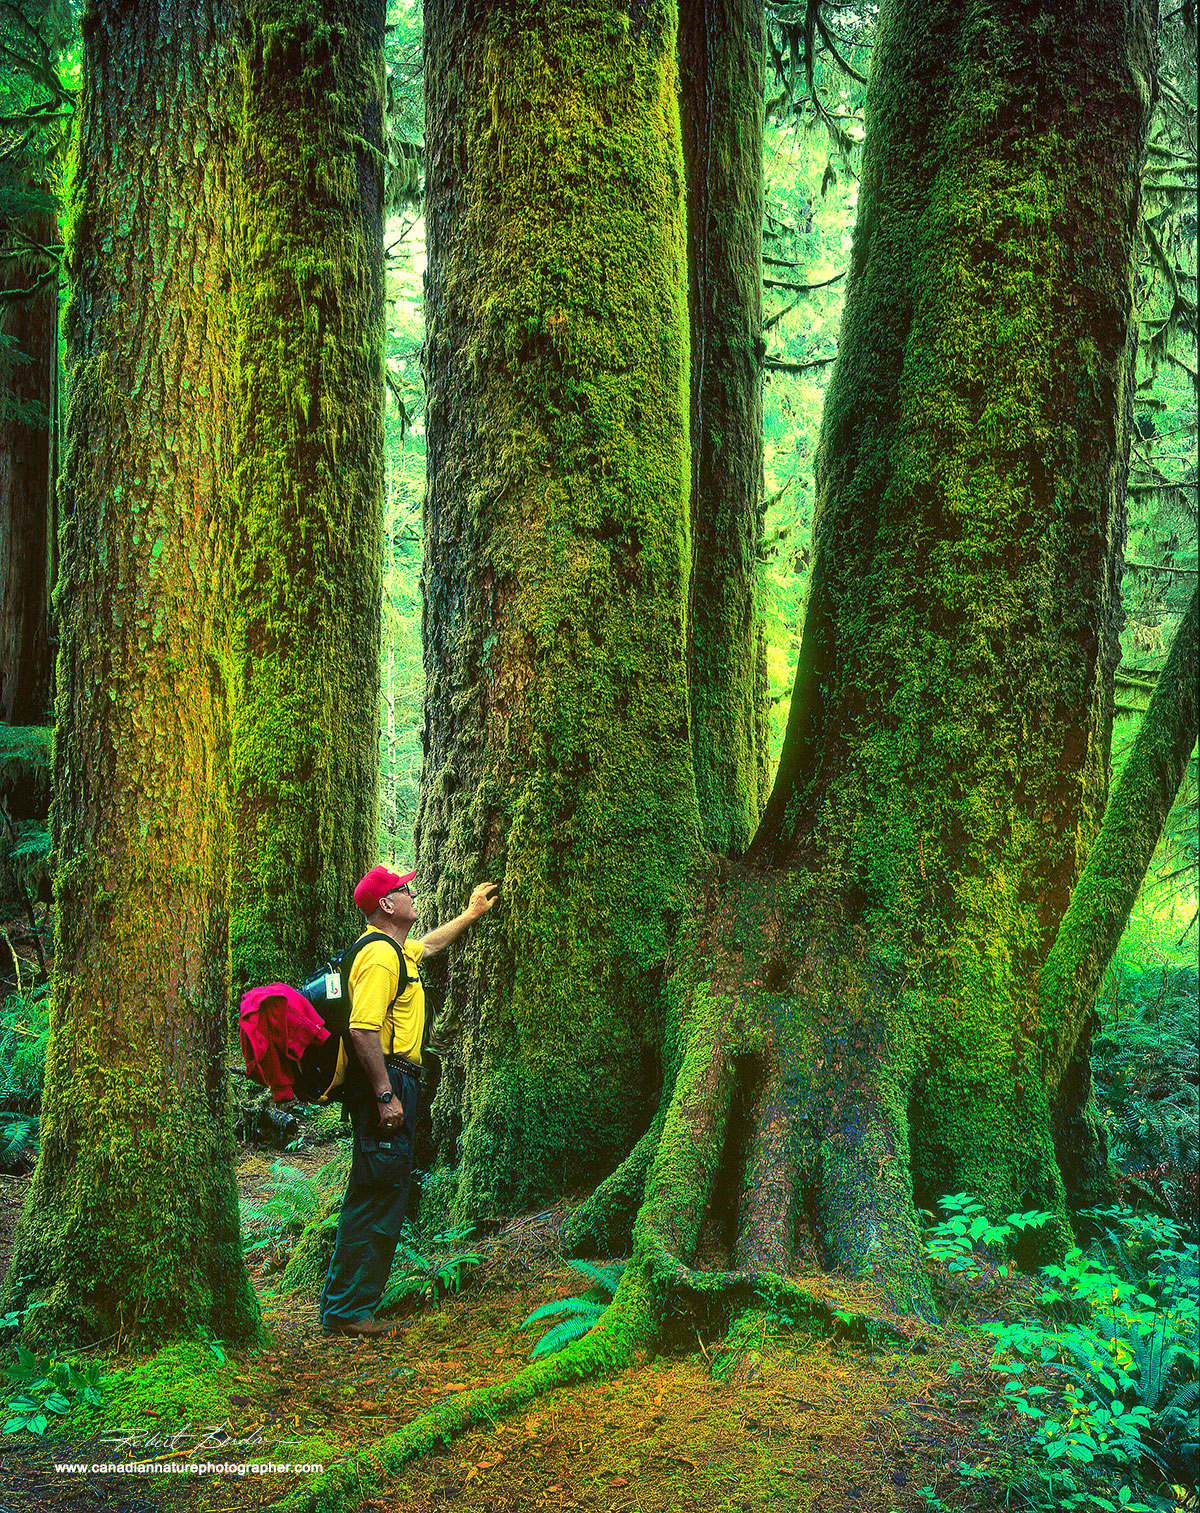 Giant Sitka Spruce in the Carmanah Valley by Robert Berdan ©